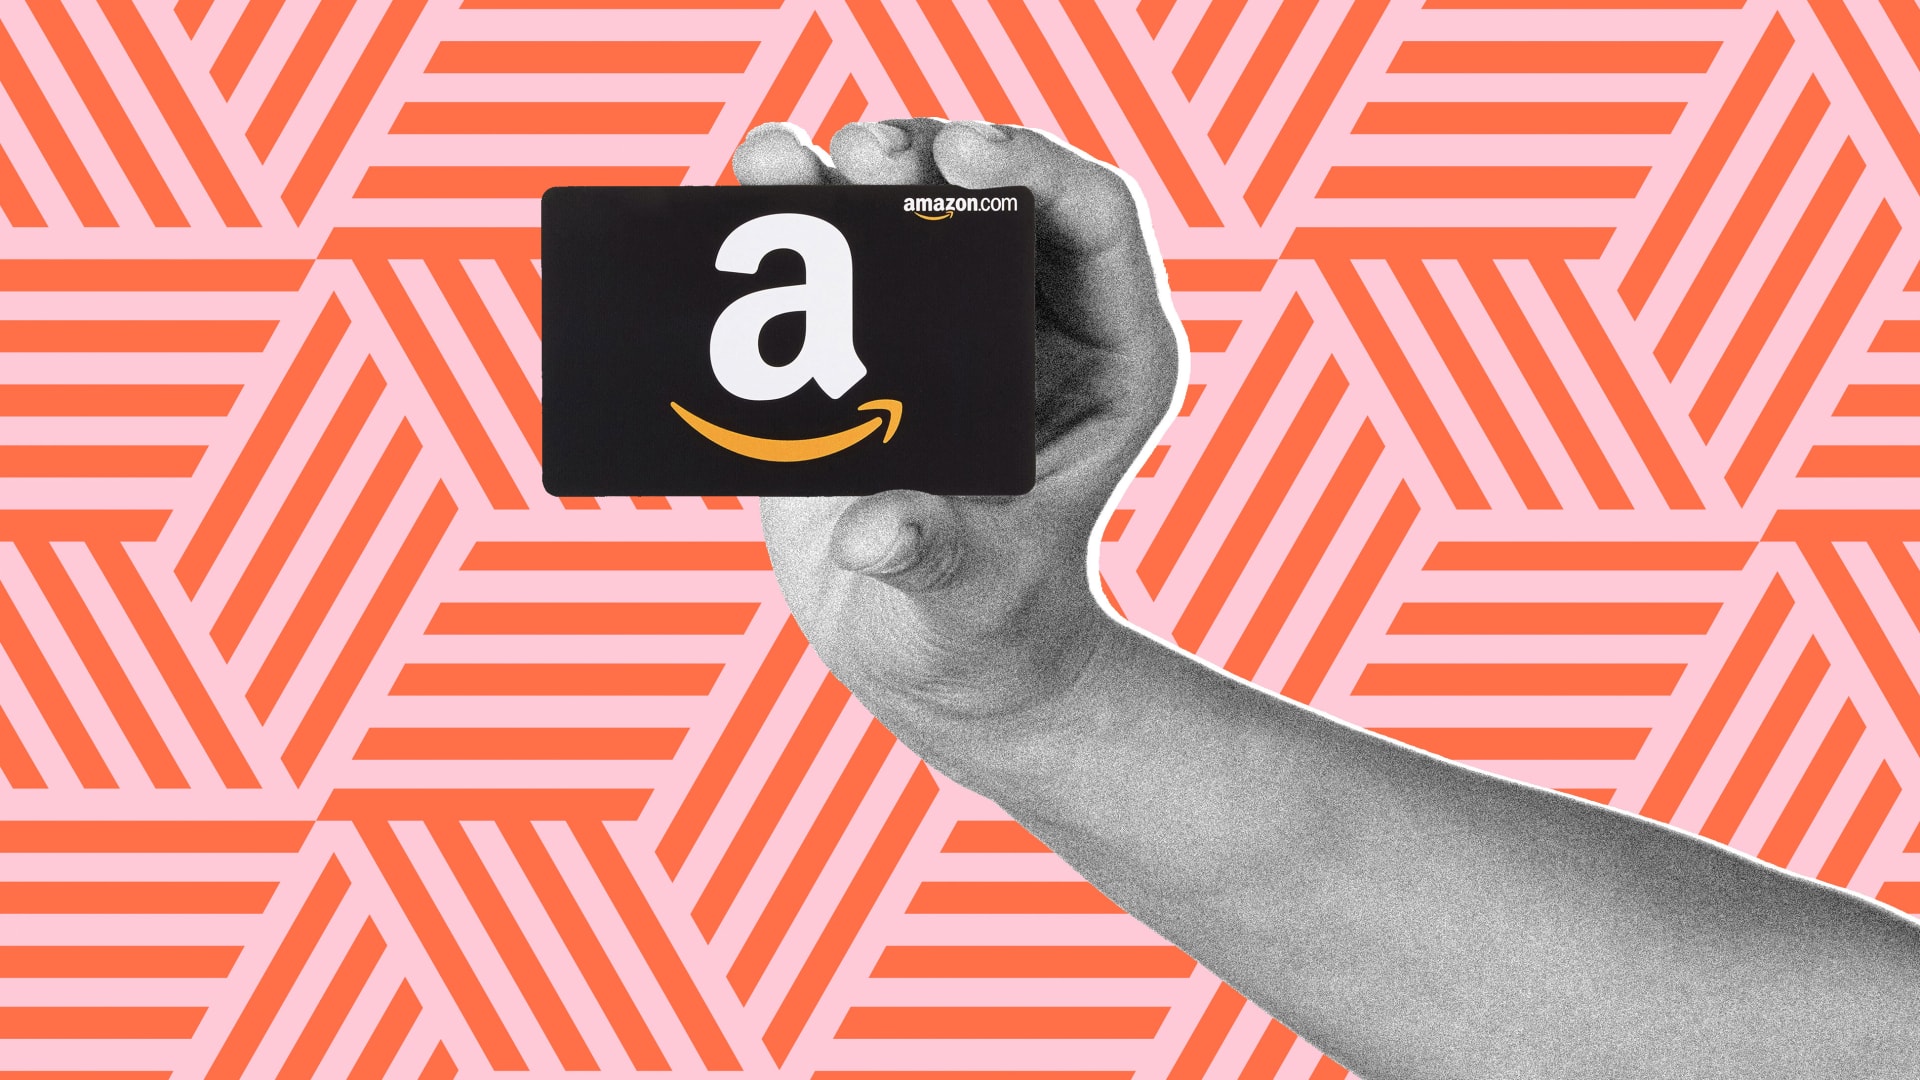 When This Company Turns Down a Job Applicant, It Sends Them a $25 Amazon Gift Card. It's a Lesson for Every Company